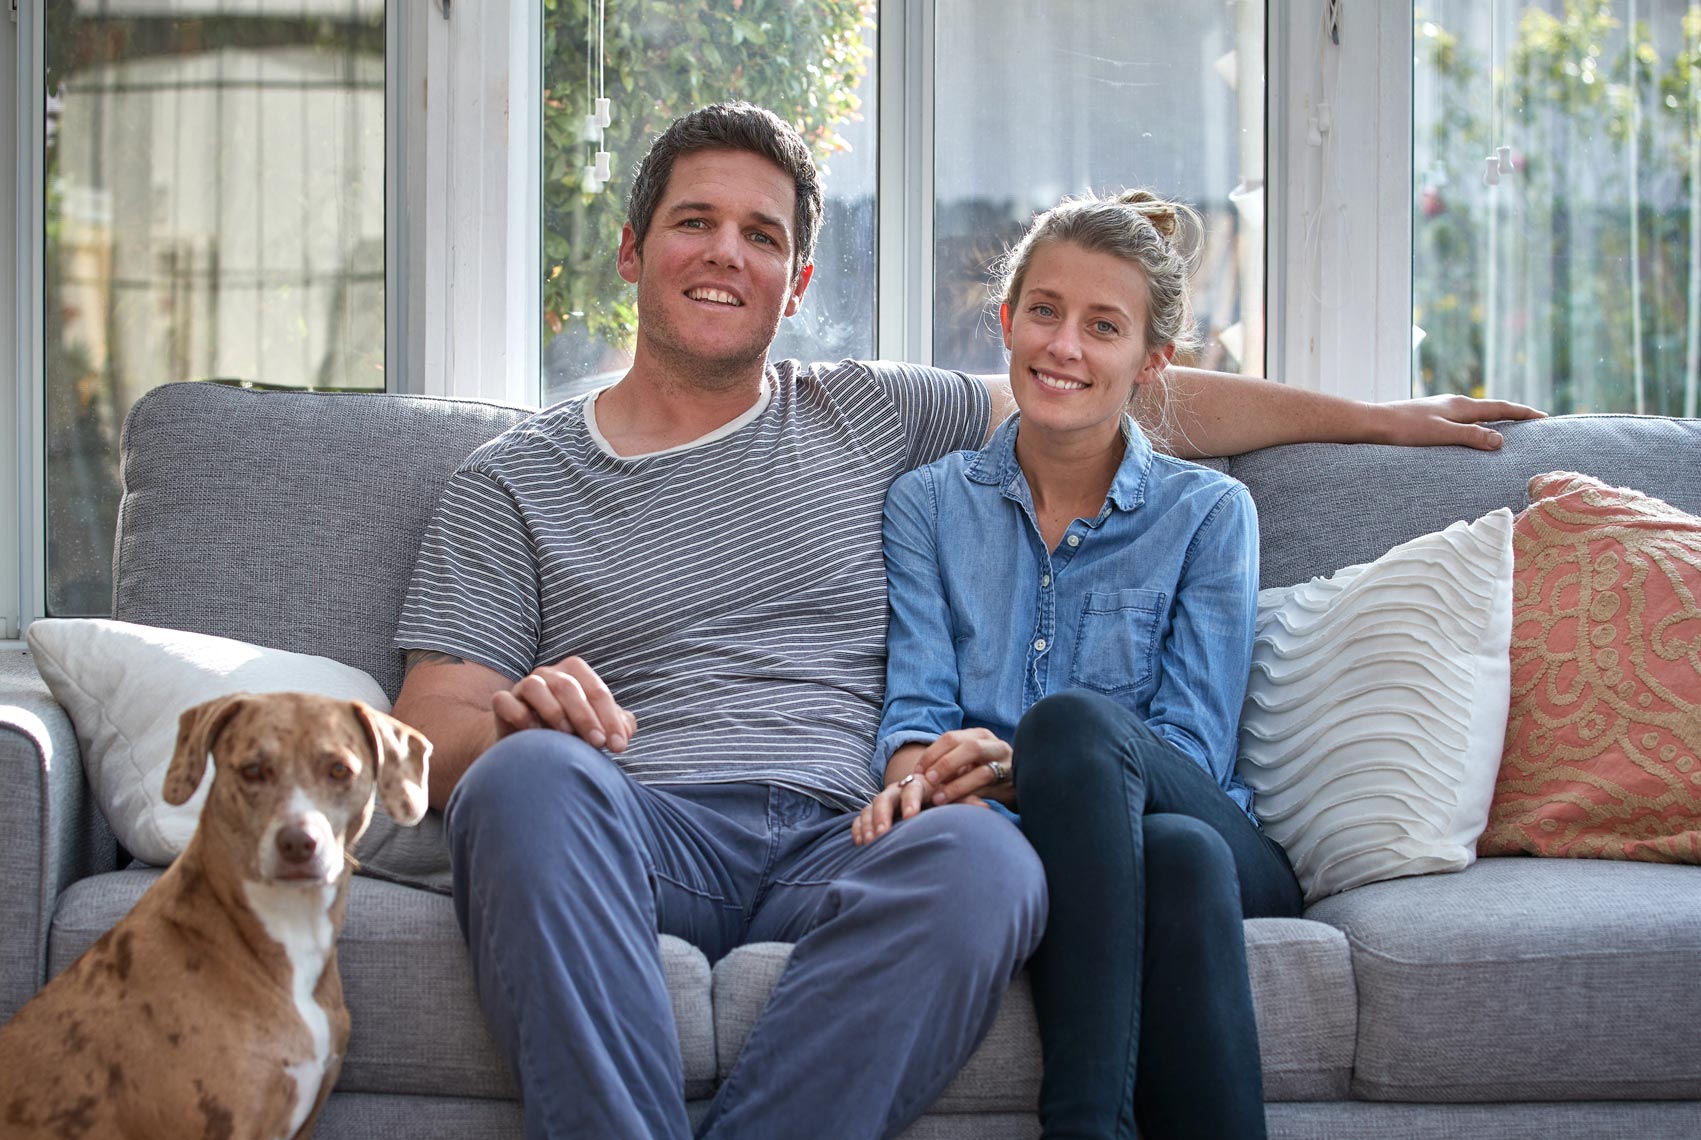 Foster Parent Couple on Couch with their Dog